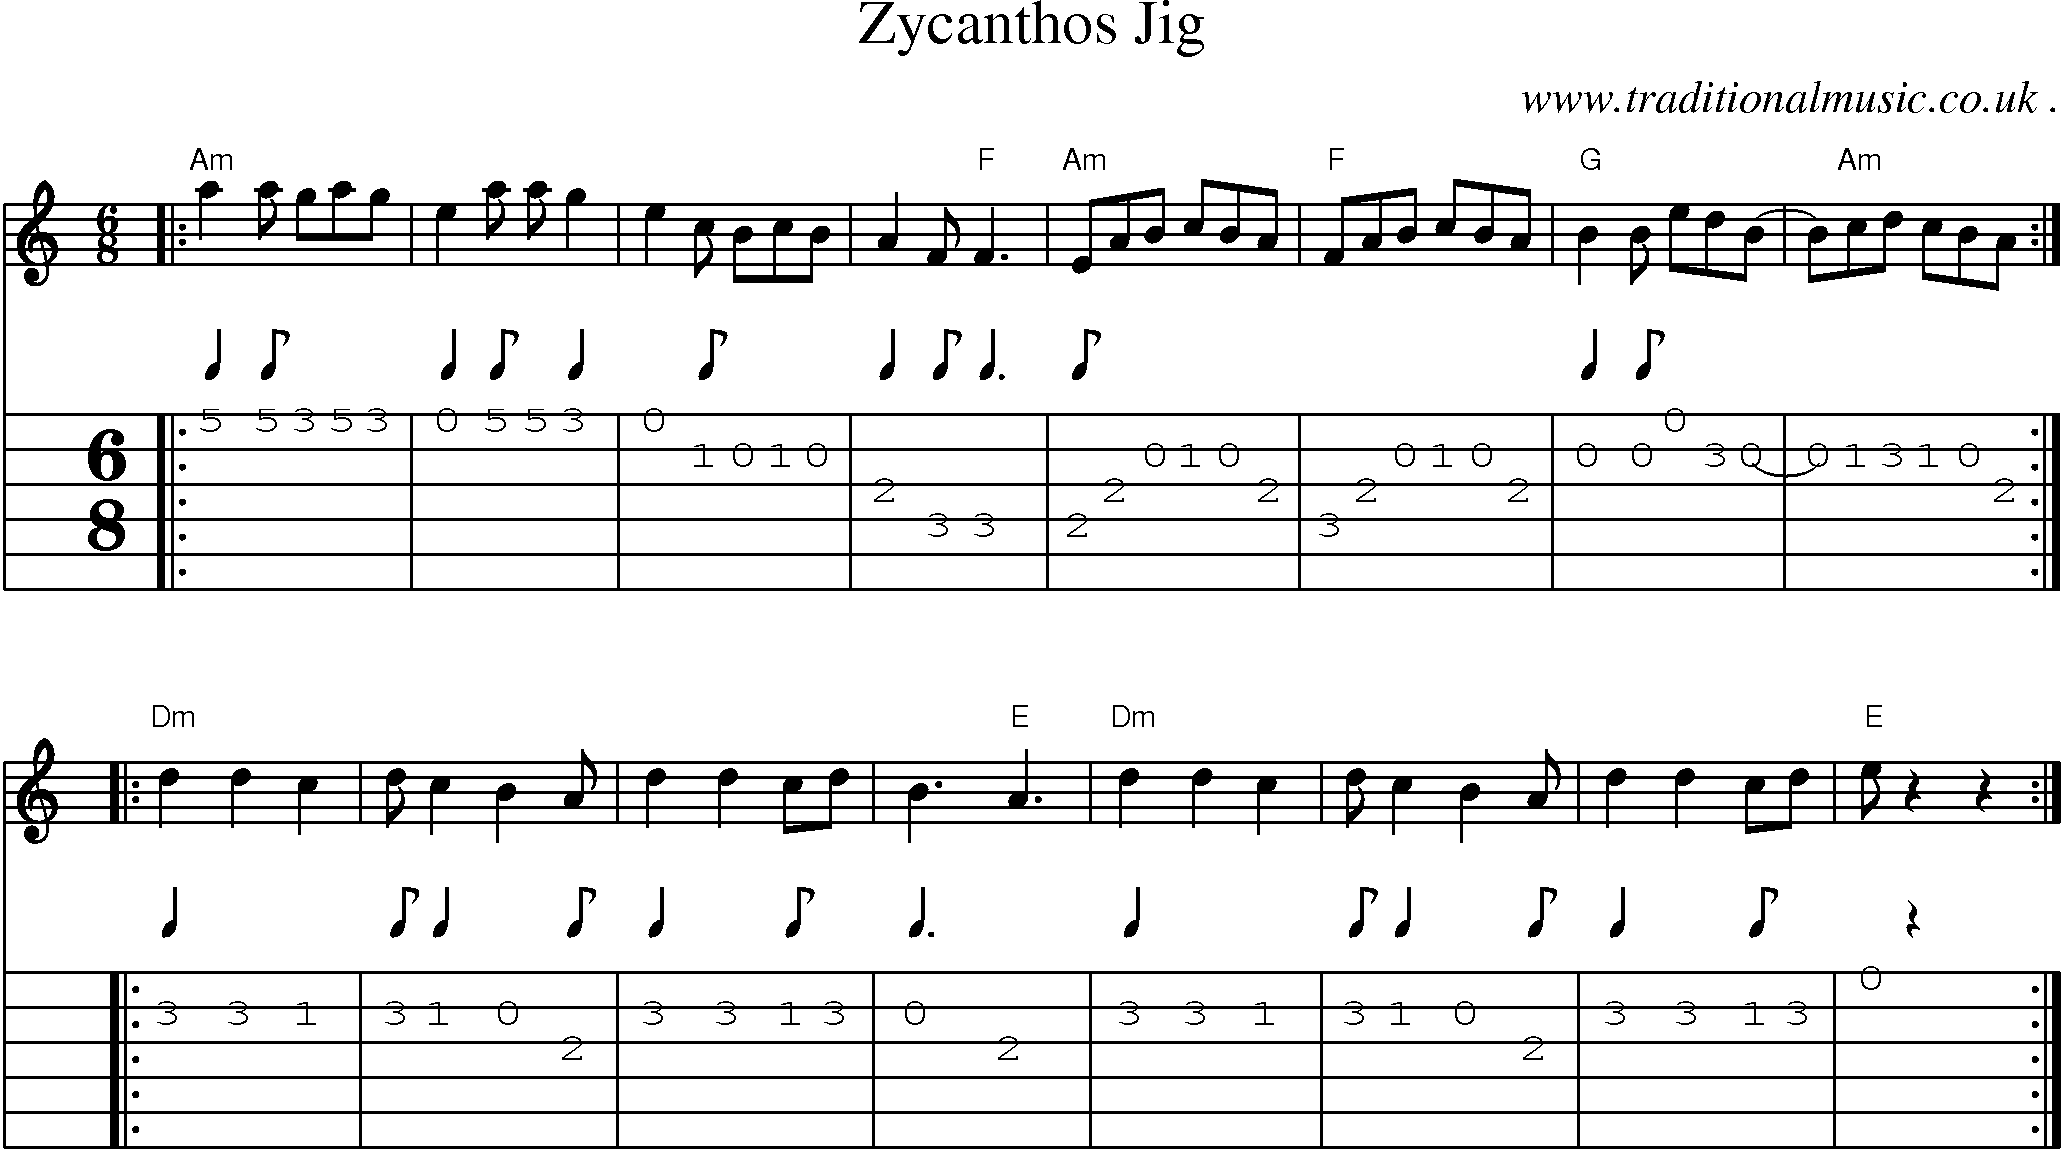 Sheet-music  score, Chords and Guitar Tabs for Zycanthos Jig